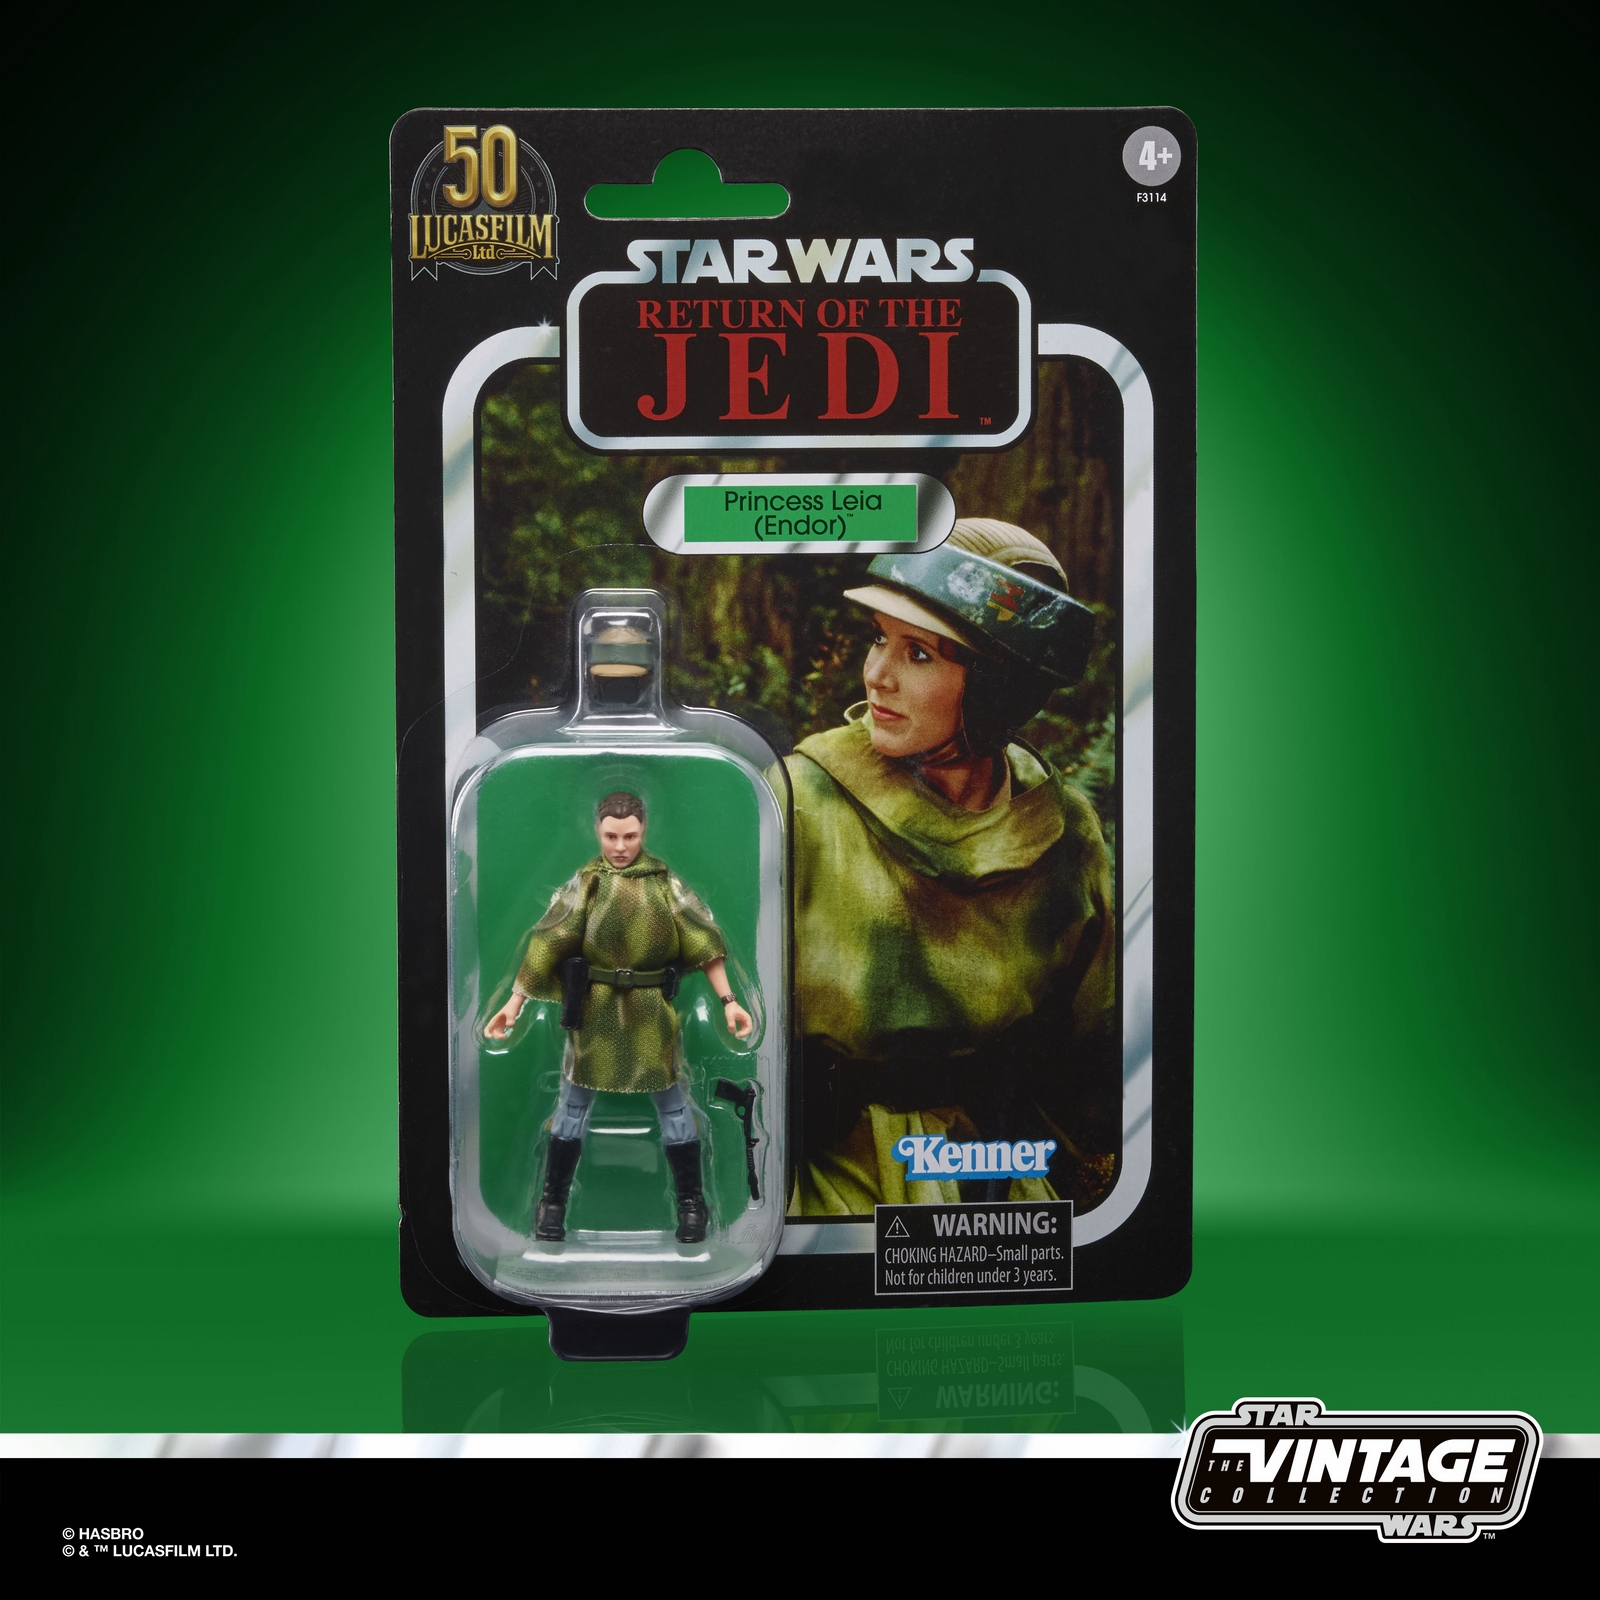 STAR WARS THE VINTAGE COLLECTION LUCASFILM FIRST 50 YEARS 3.75-INCH PRINCESS LEIA (ENDOR) Figure - in pck.jpg